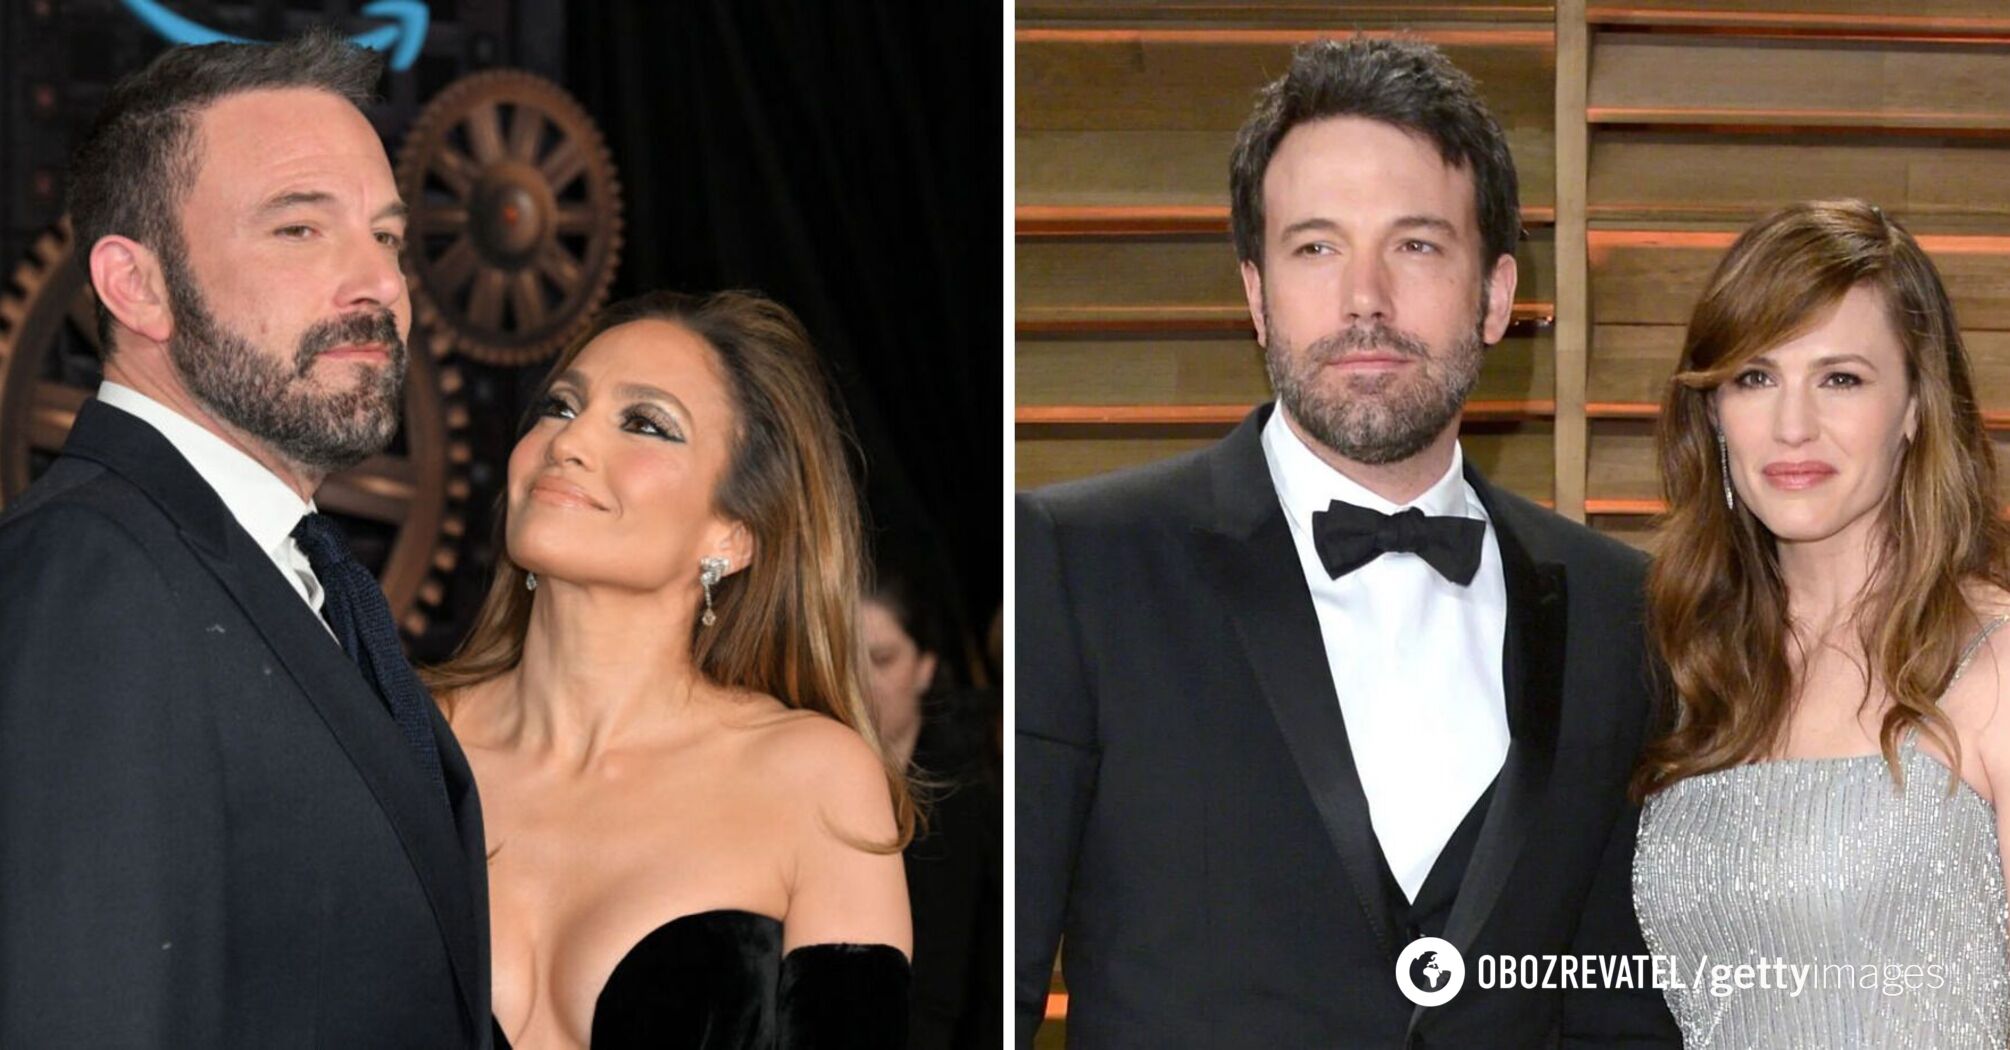 Jennifer Garner becomes an 'unexpected ally' for Jennifer Lopez in her marital troubles with Ben Affleck